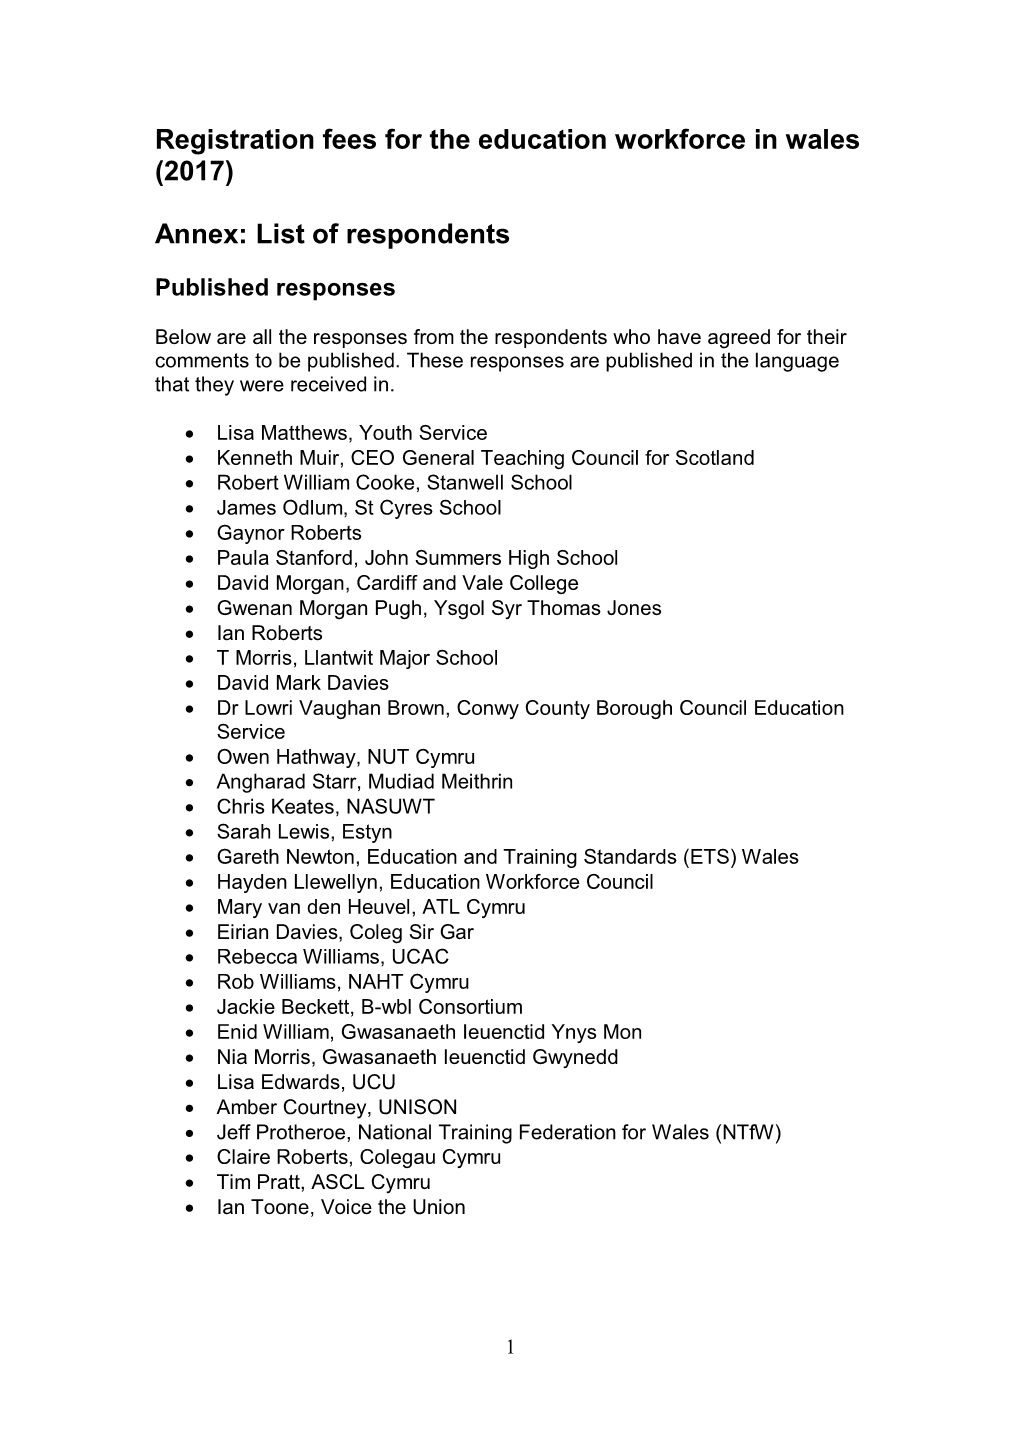 Registration Fees for the Education Workforce in Wales (2017) Annex